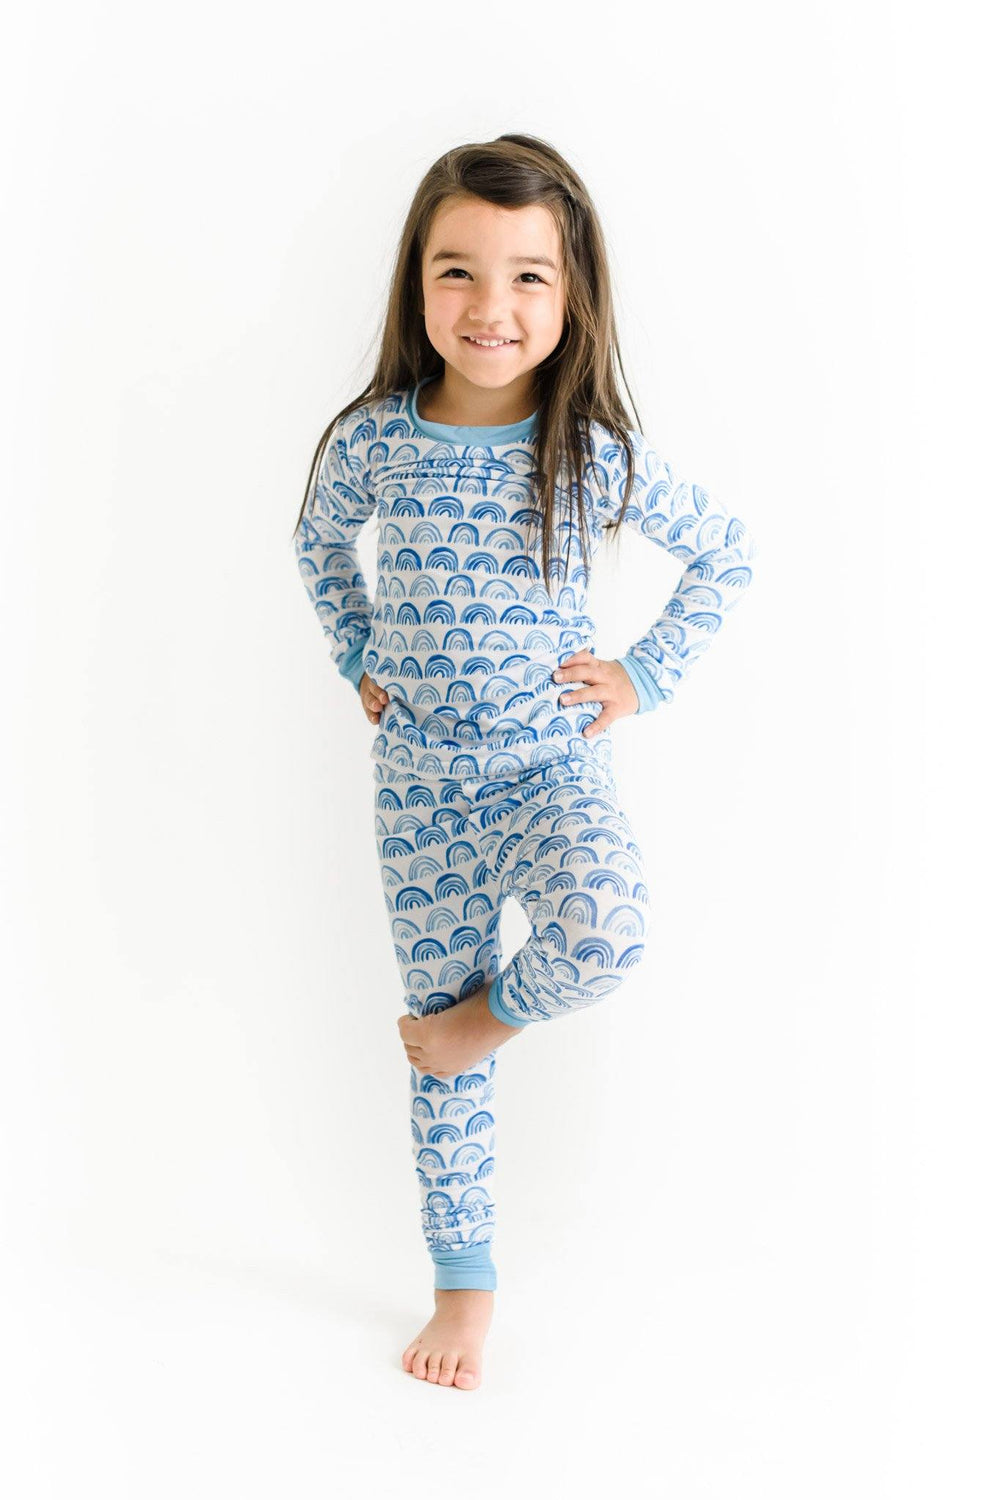 Image of toddler girl wearing rainbow printed pajama set. This print sits on a white background with shades of blue rainbows and sky blue trim details.